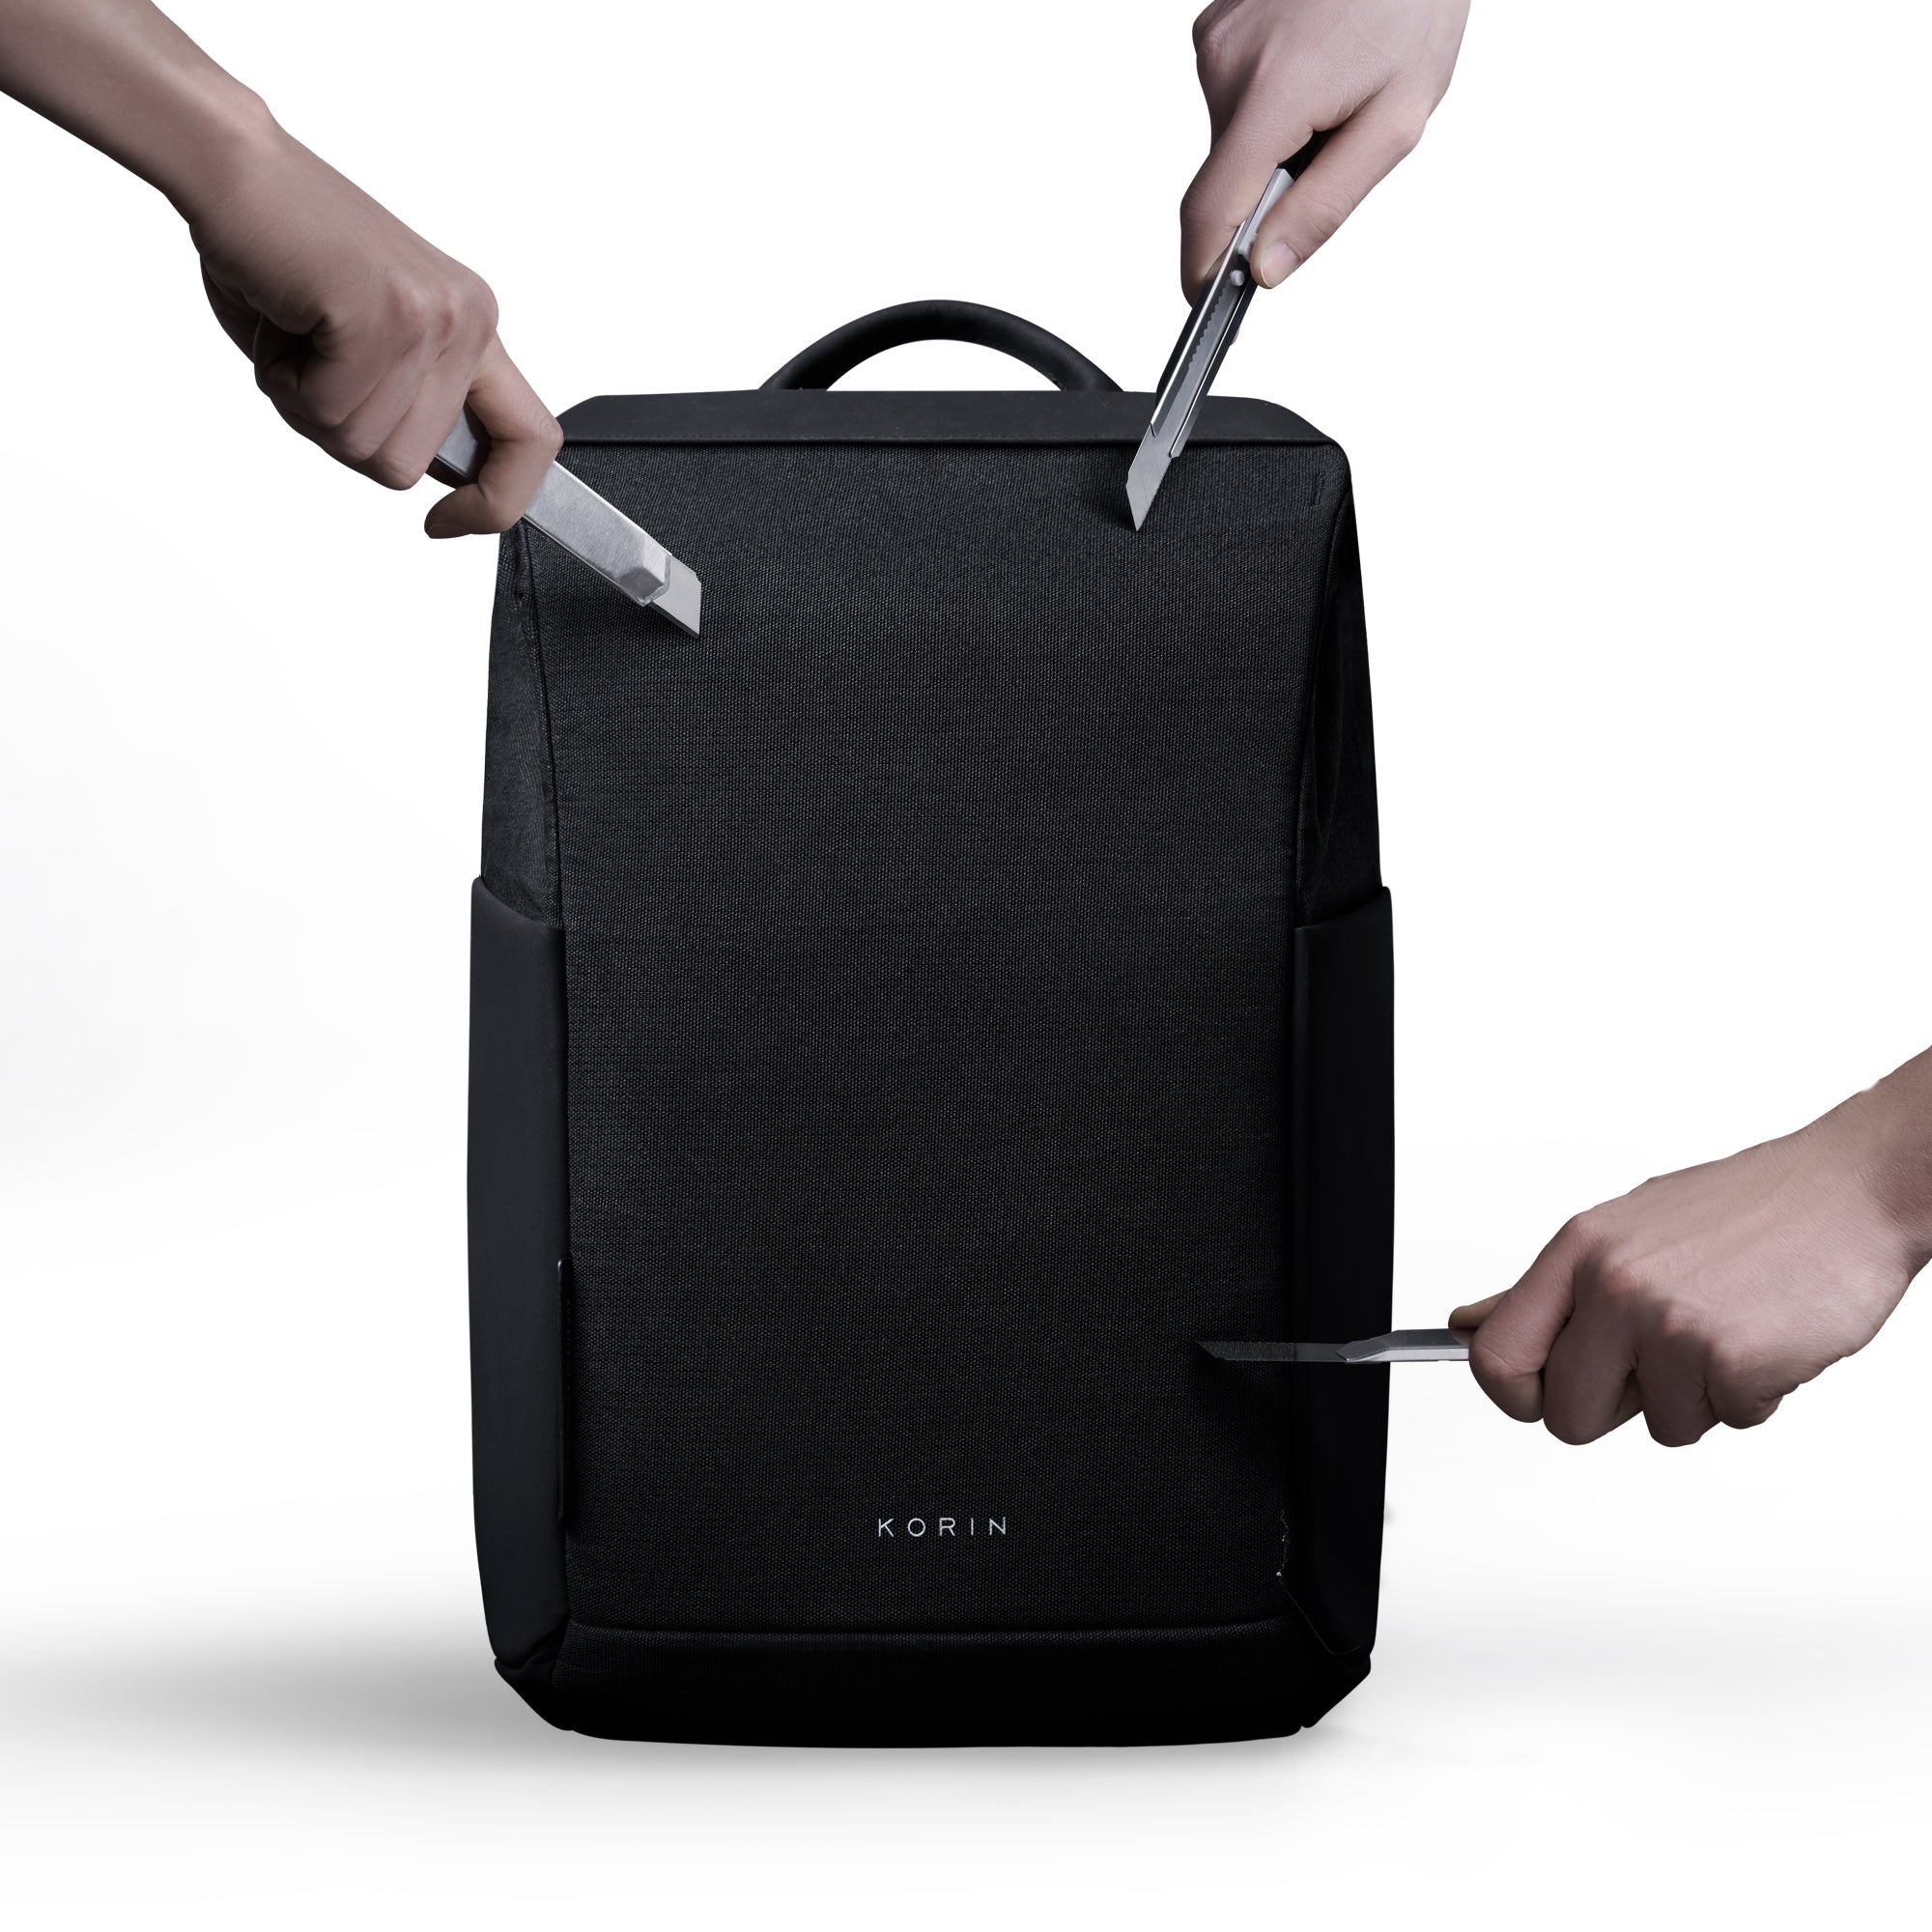 SnapPack | Travel, Urban Commute & Anti-Theft